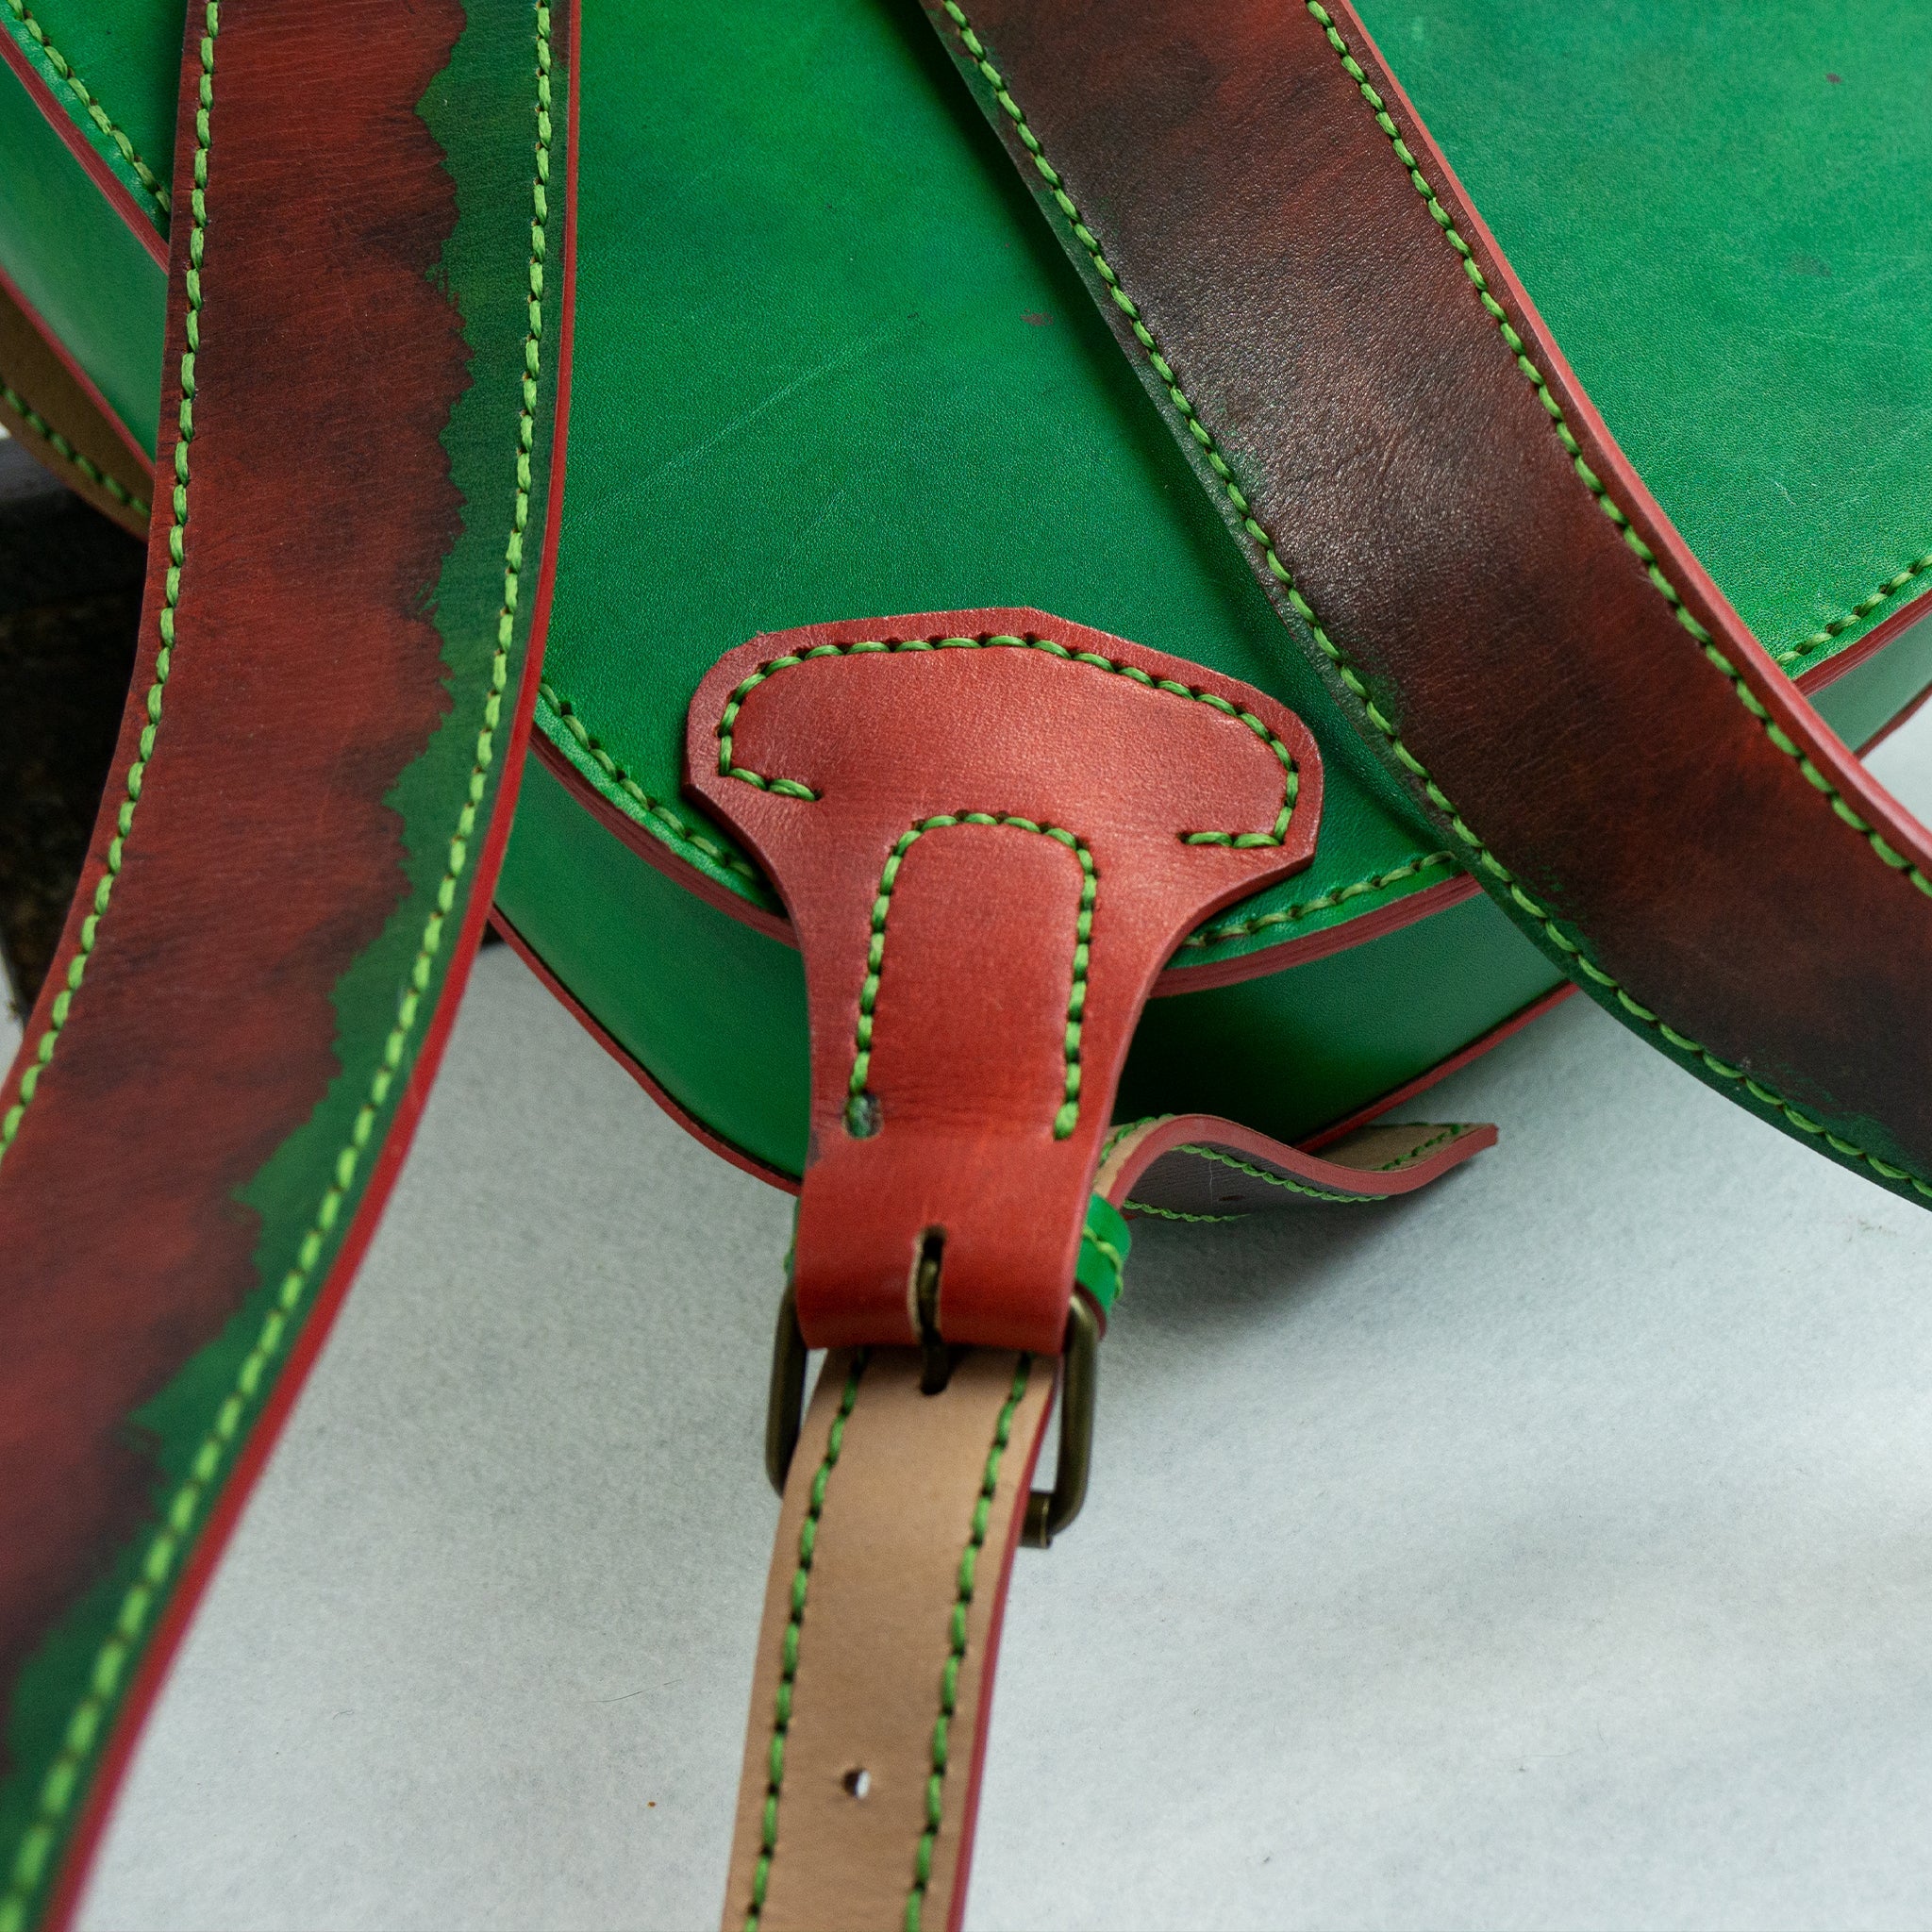 Elf Backpack, PDF Pattern and Instructional Video by Vasile and Pavel - Vasile and Pavel Leather Patterns